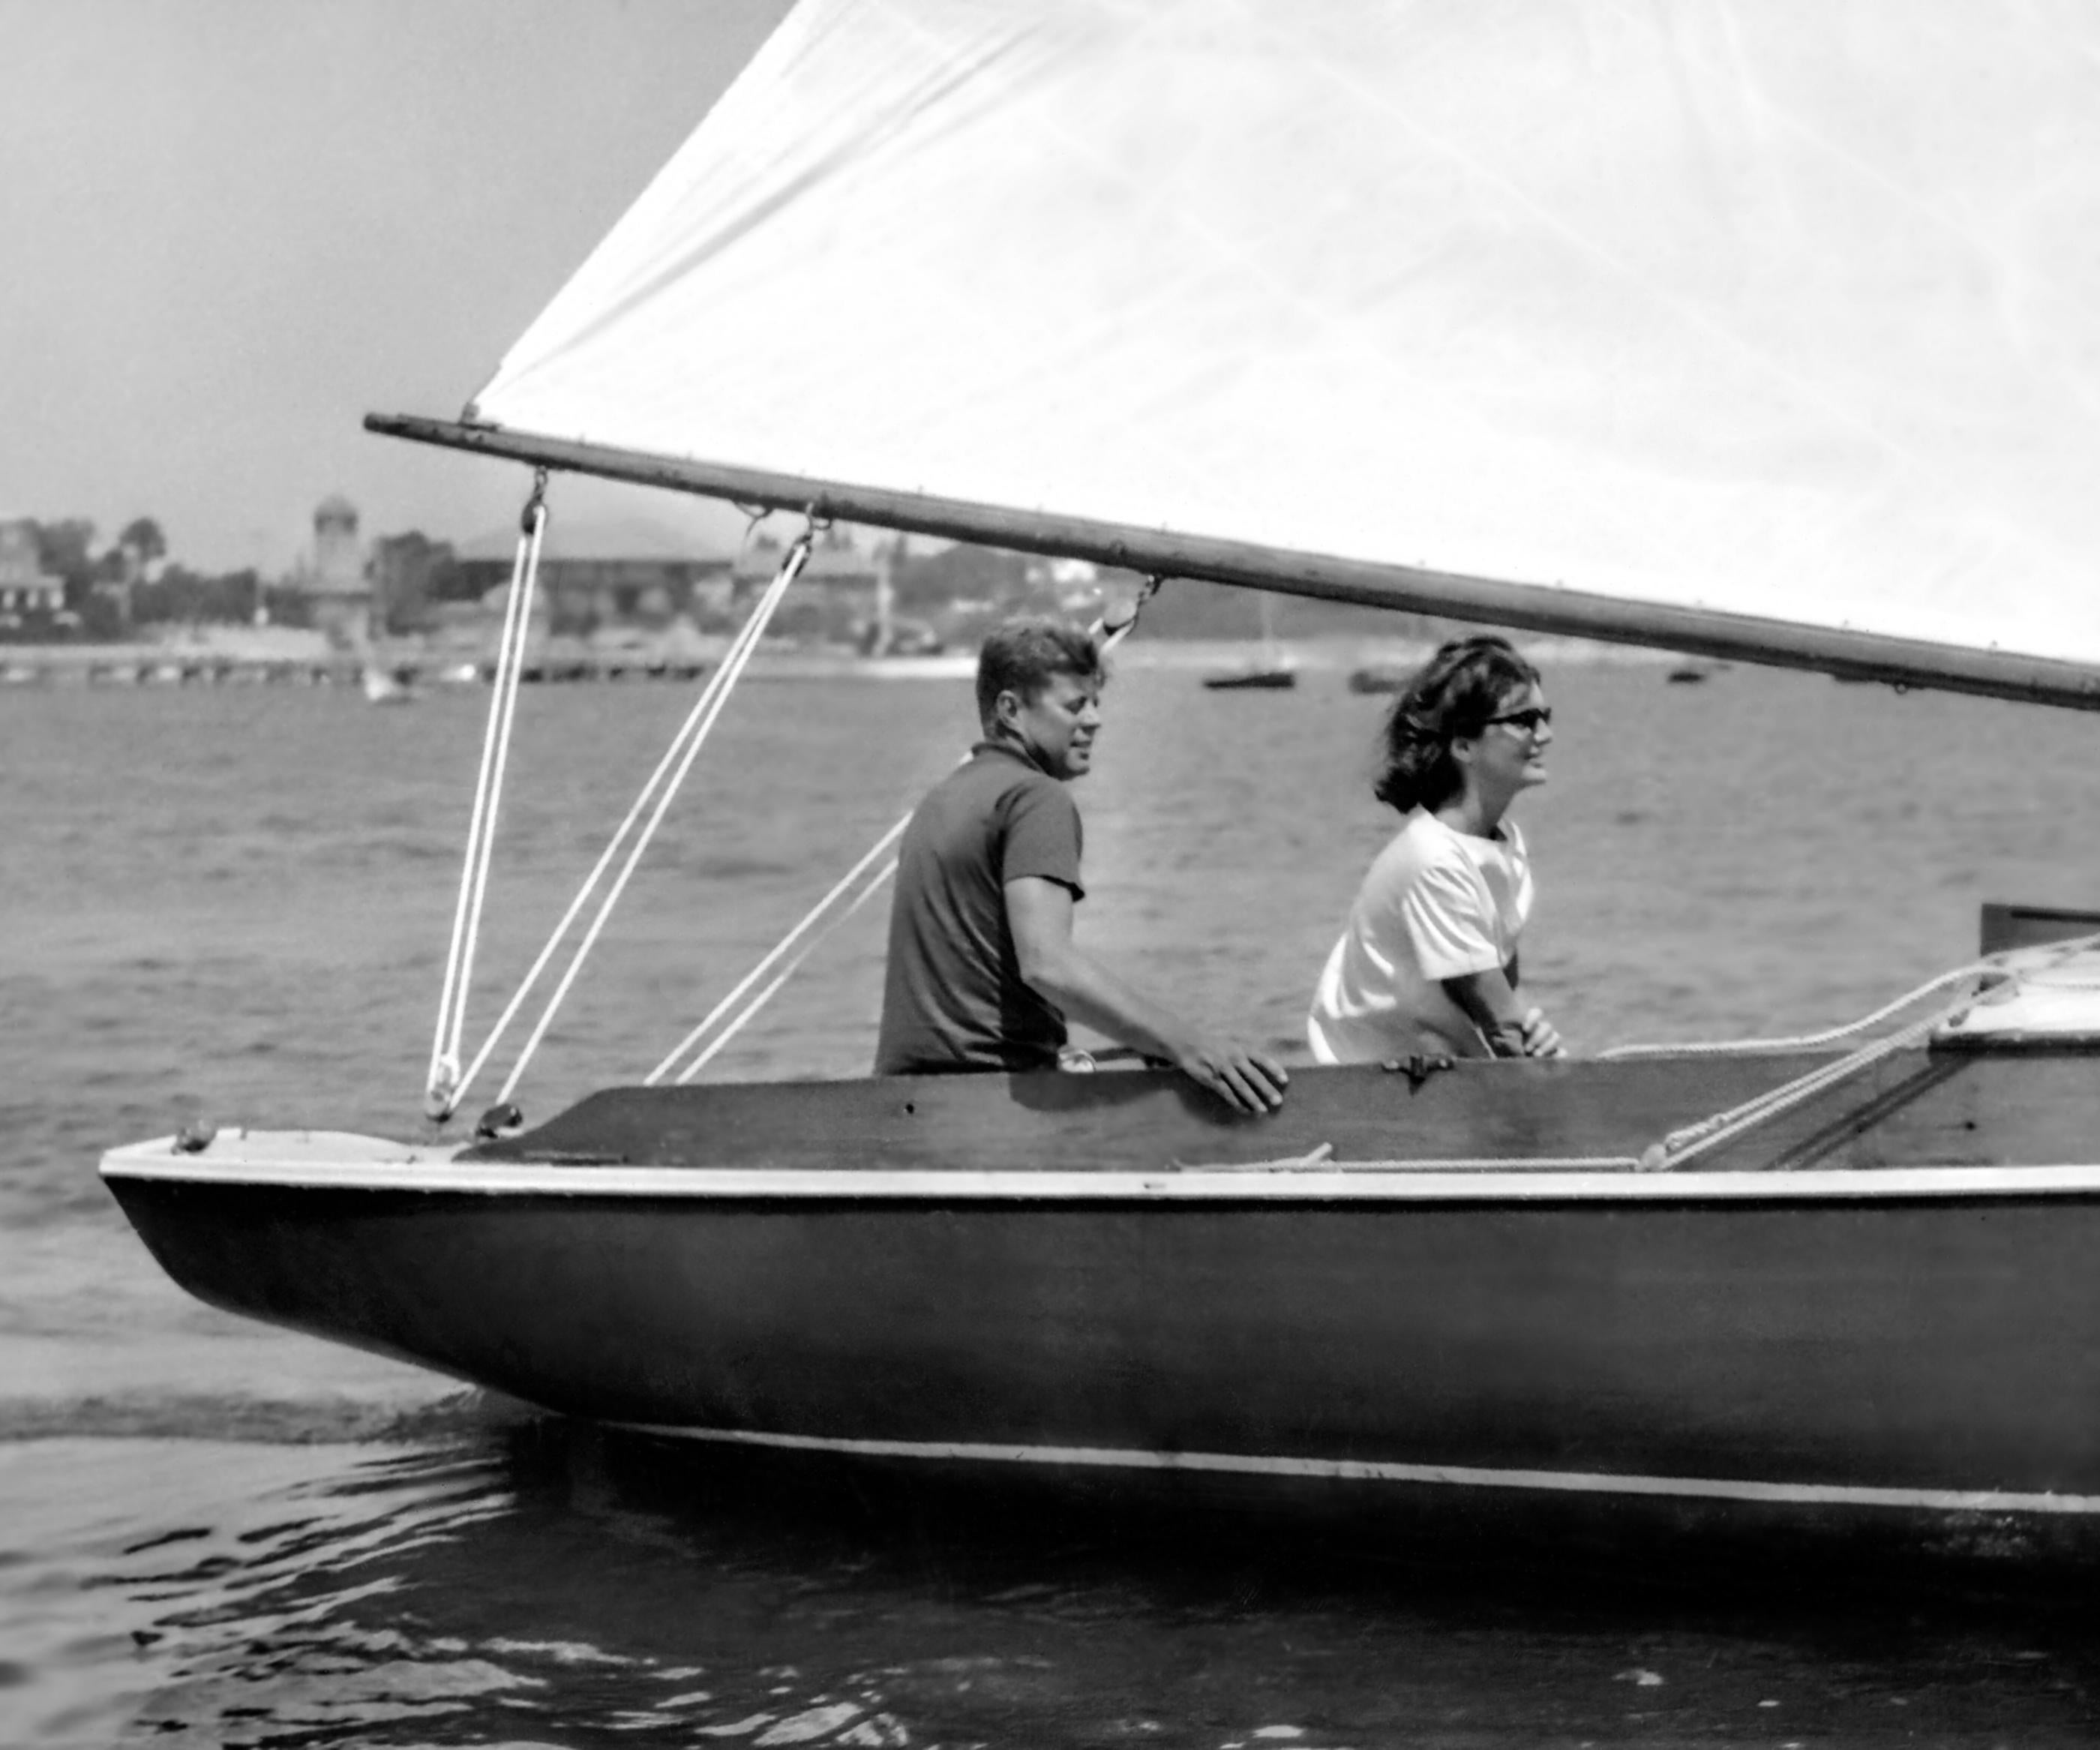 Unknown Portrait Photograph - John F. Kennedy and Jackie Kennedy Sailing